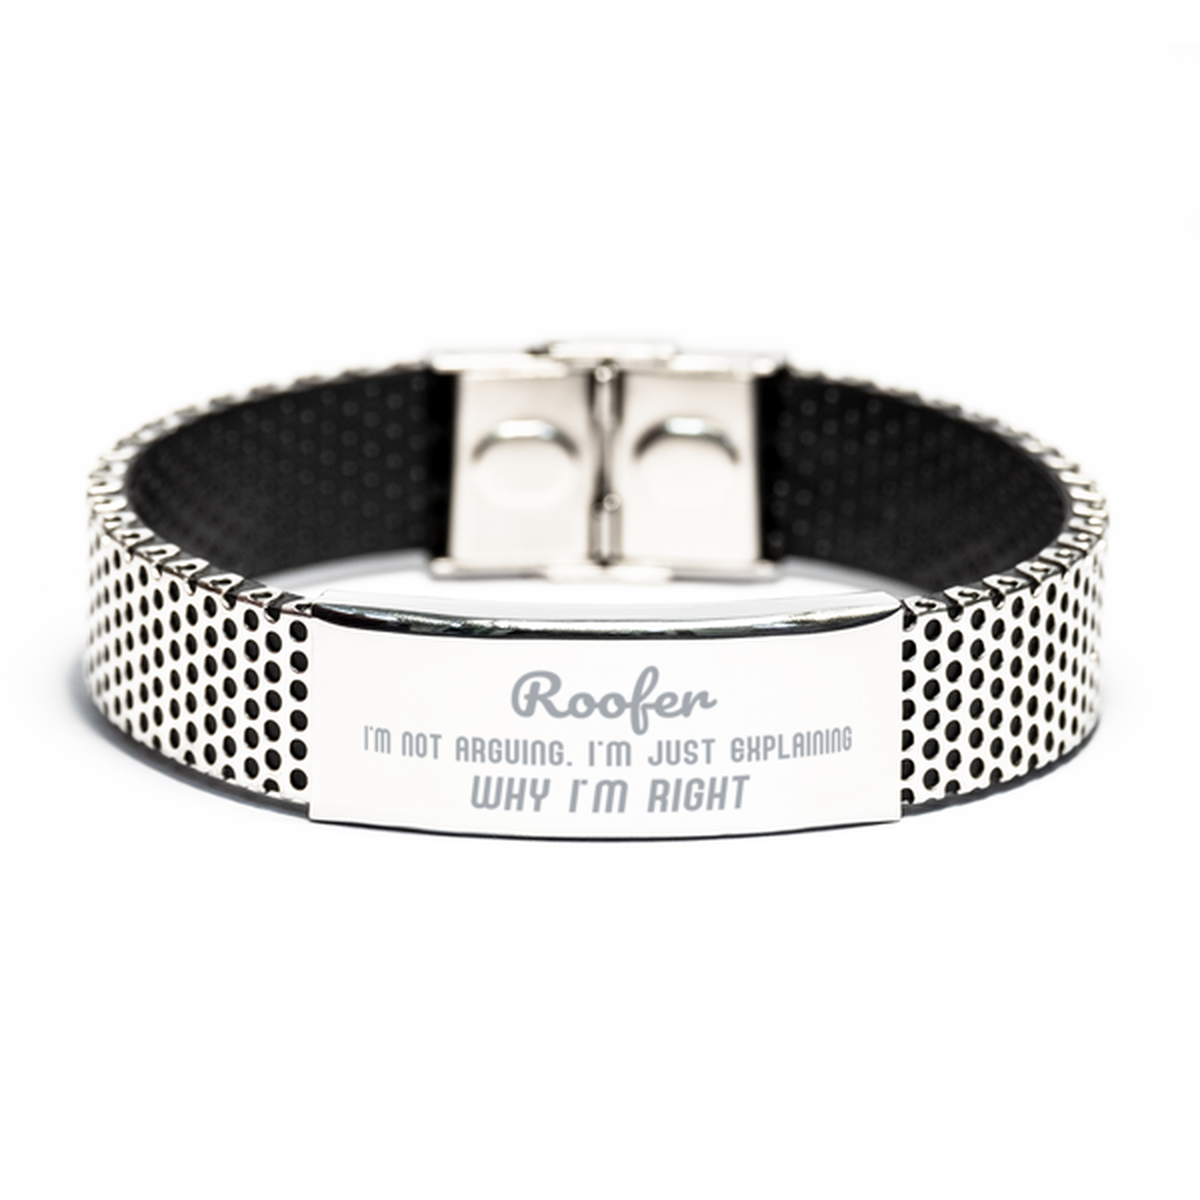 Roofer I'm not Arguing. I'm Just Explaining Why I'm RIGHT Stainless Steel Bracelet, Funny Saying Quote Roofer Gifts For Roofer Graduation Birthday Christmas Gifts for Men Women Coworker